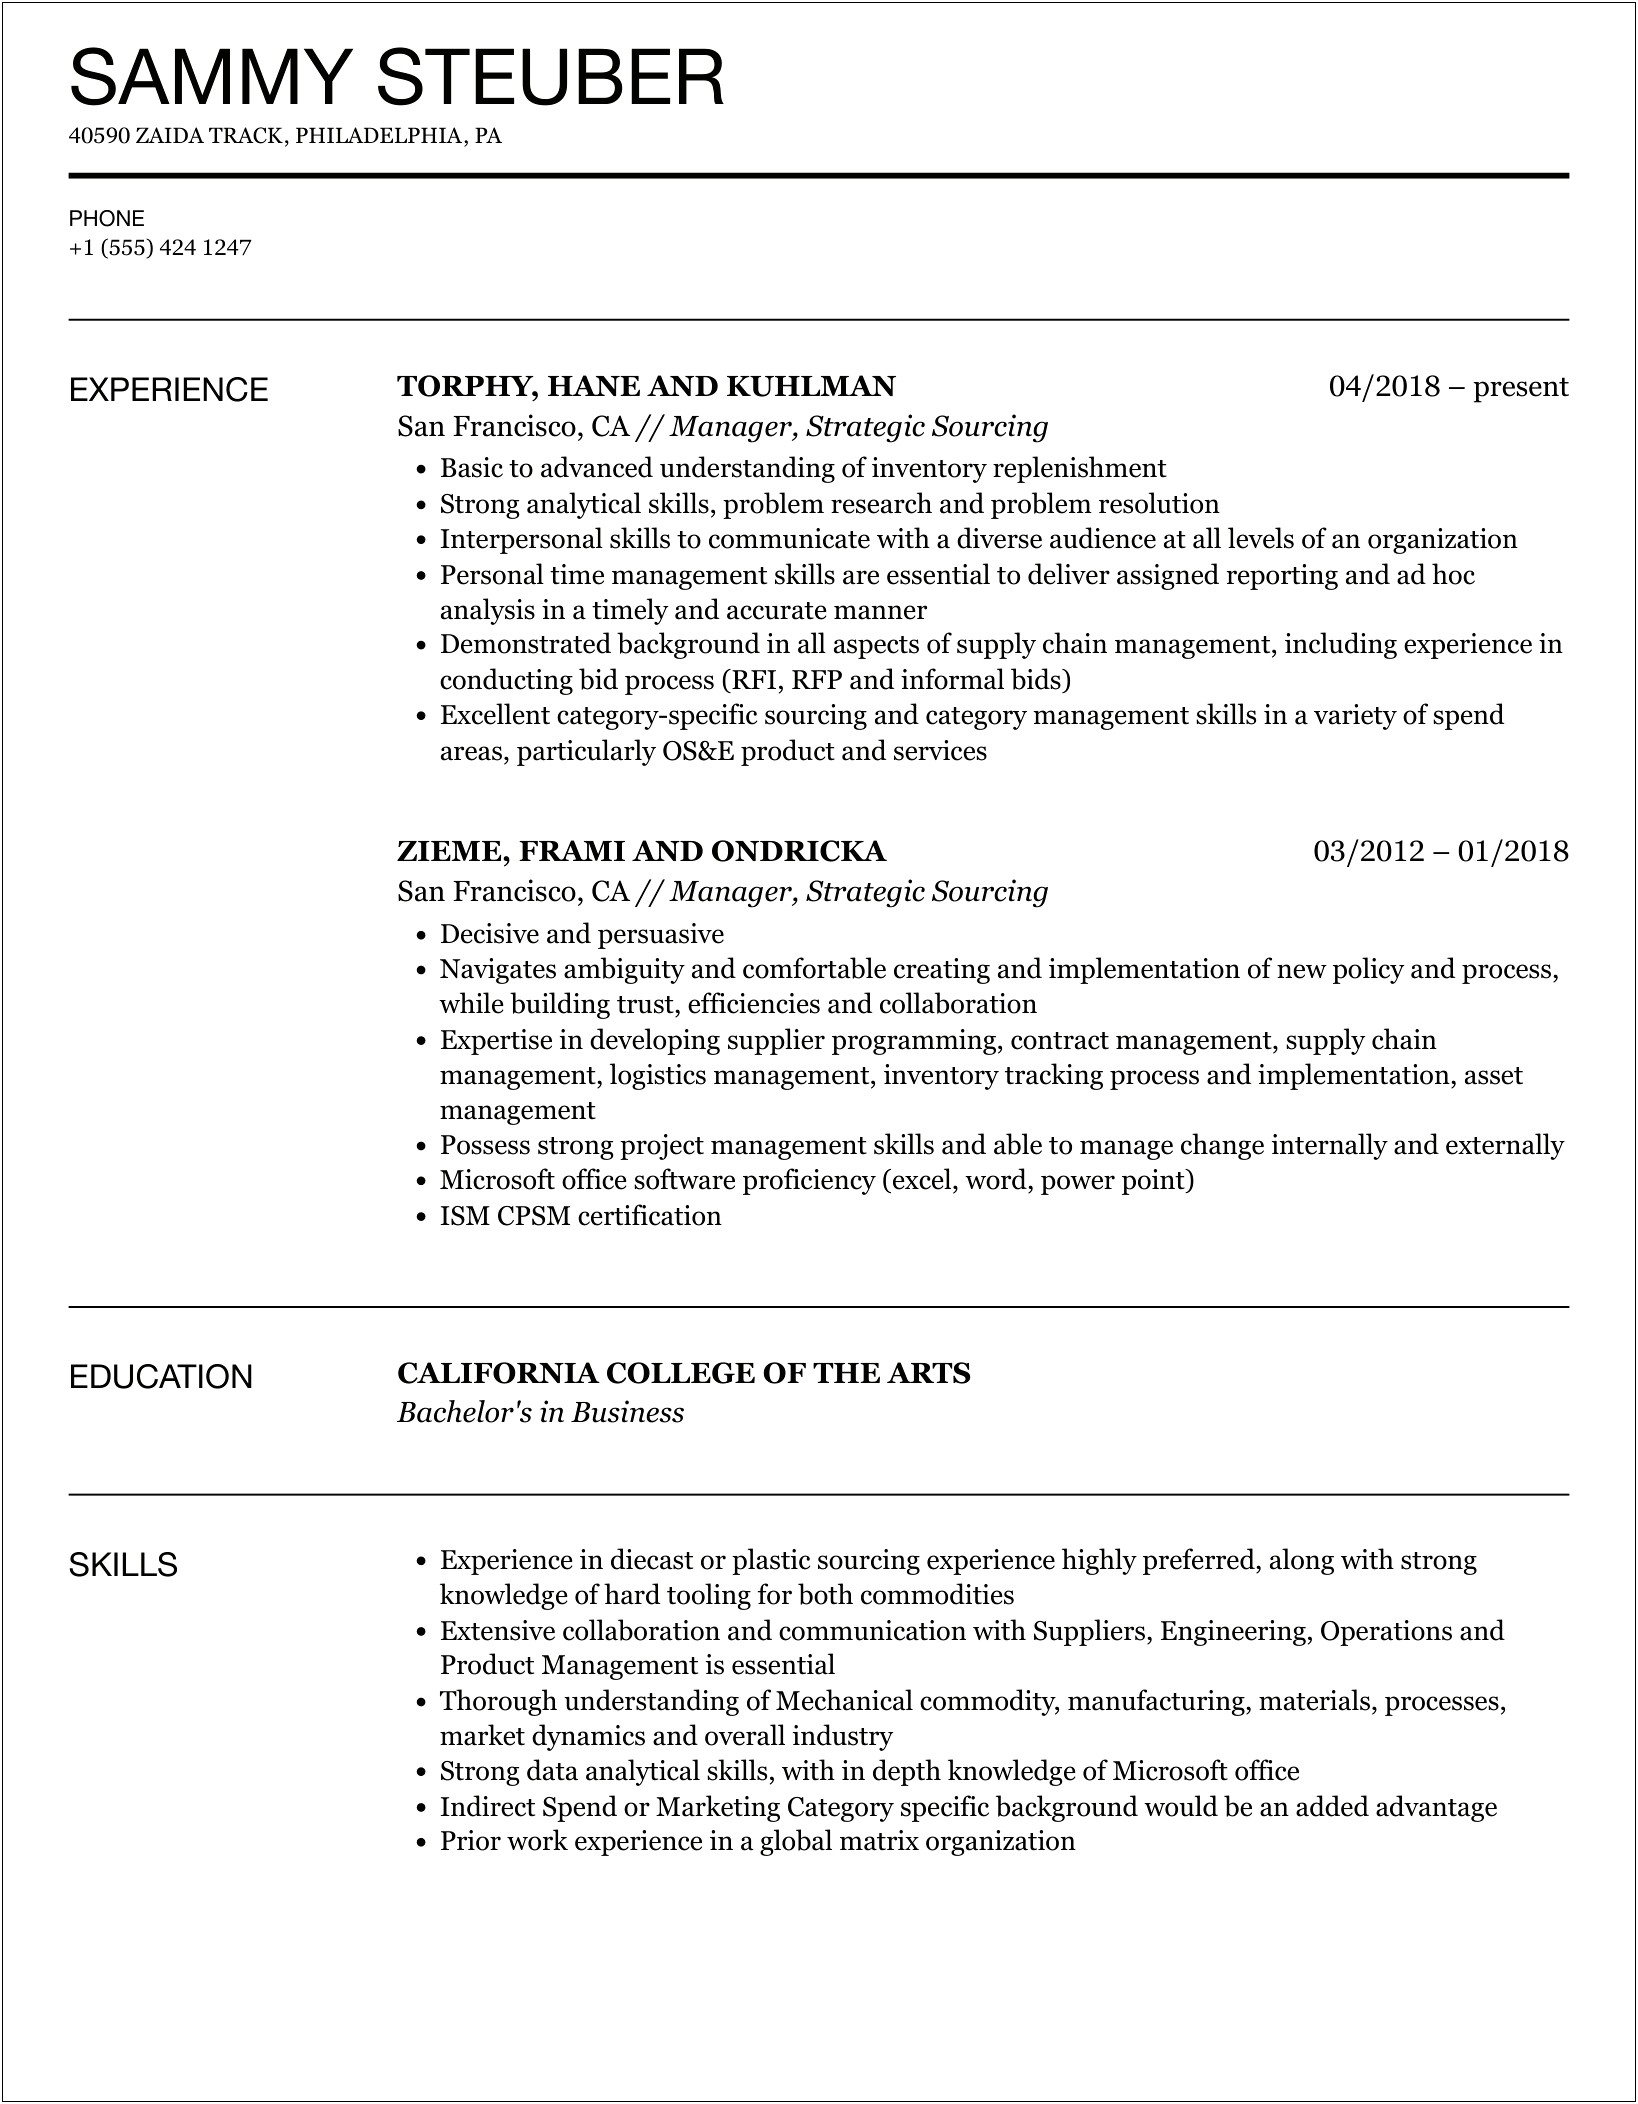 Managed Supplier Lifecycle Strategic Sourcing Resume